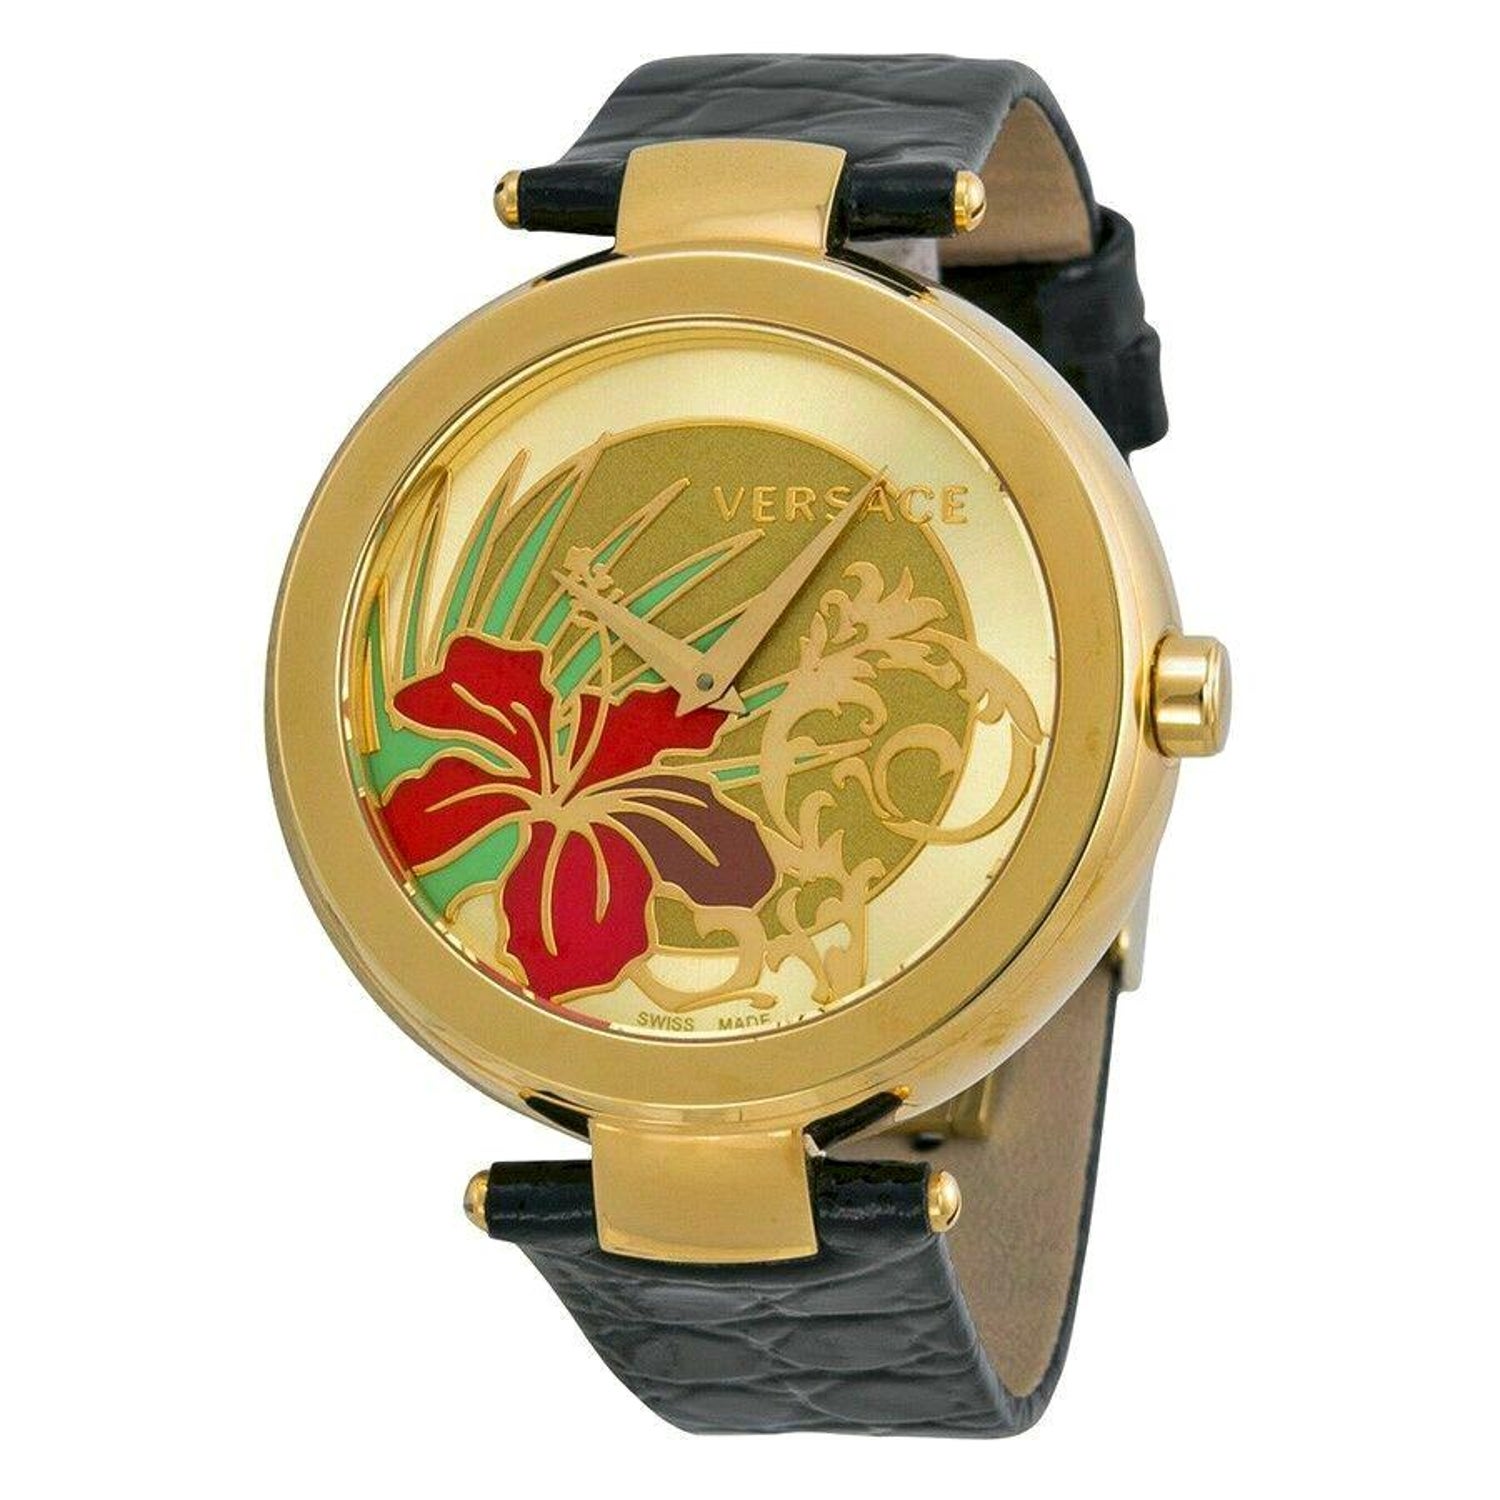 Versace Watch Mystique - For Sale on 1stDibs